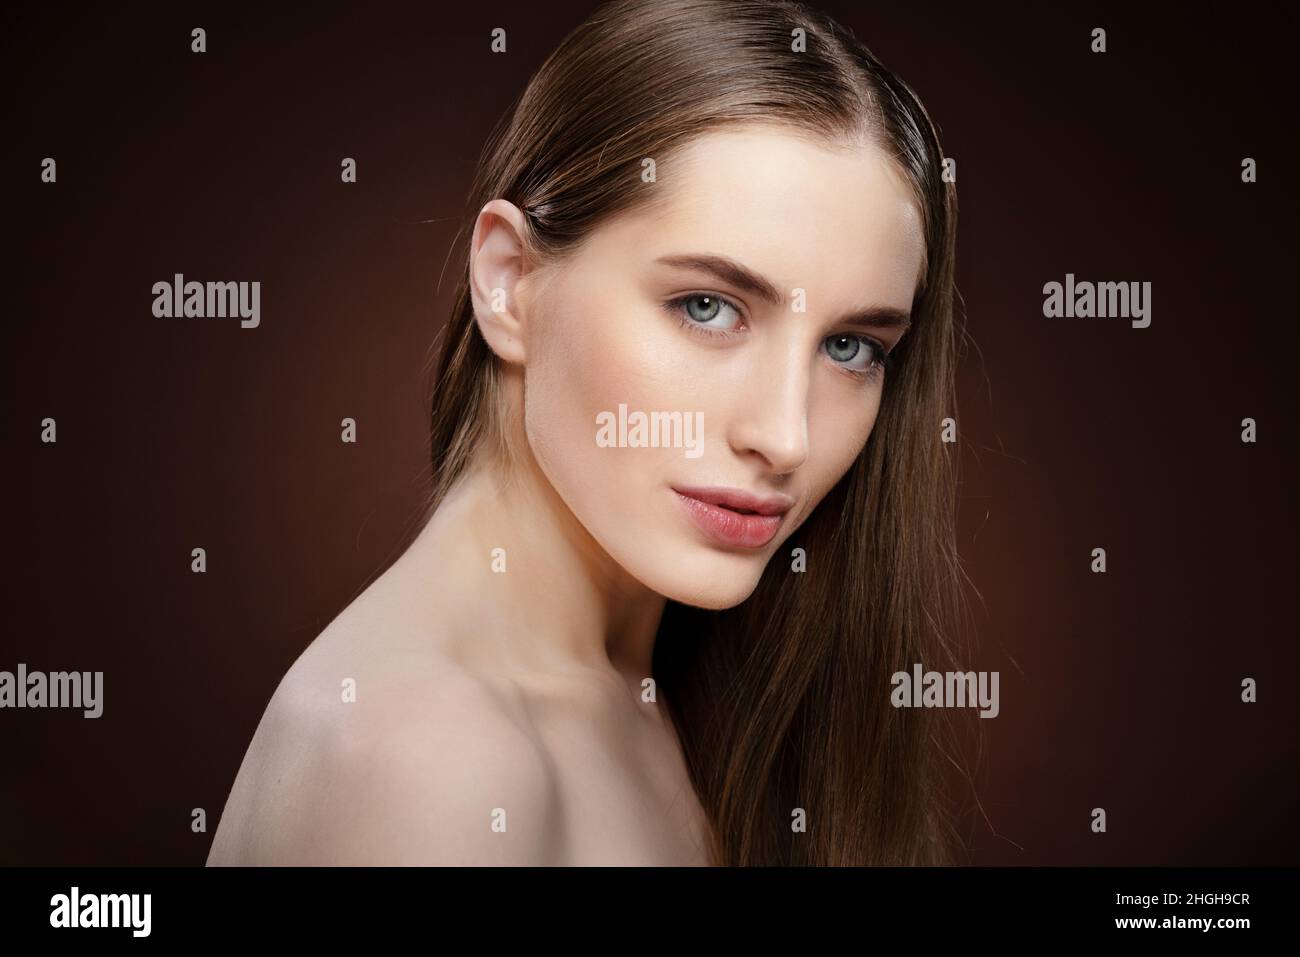 Spa and beautiful concept. Standing half-turned natural beauty woman with no make up face portrait. Healthy pure skin model posing on camera isolated on black background. Natural make up concept.  Stock Photo